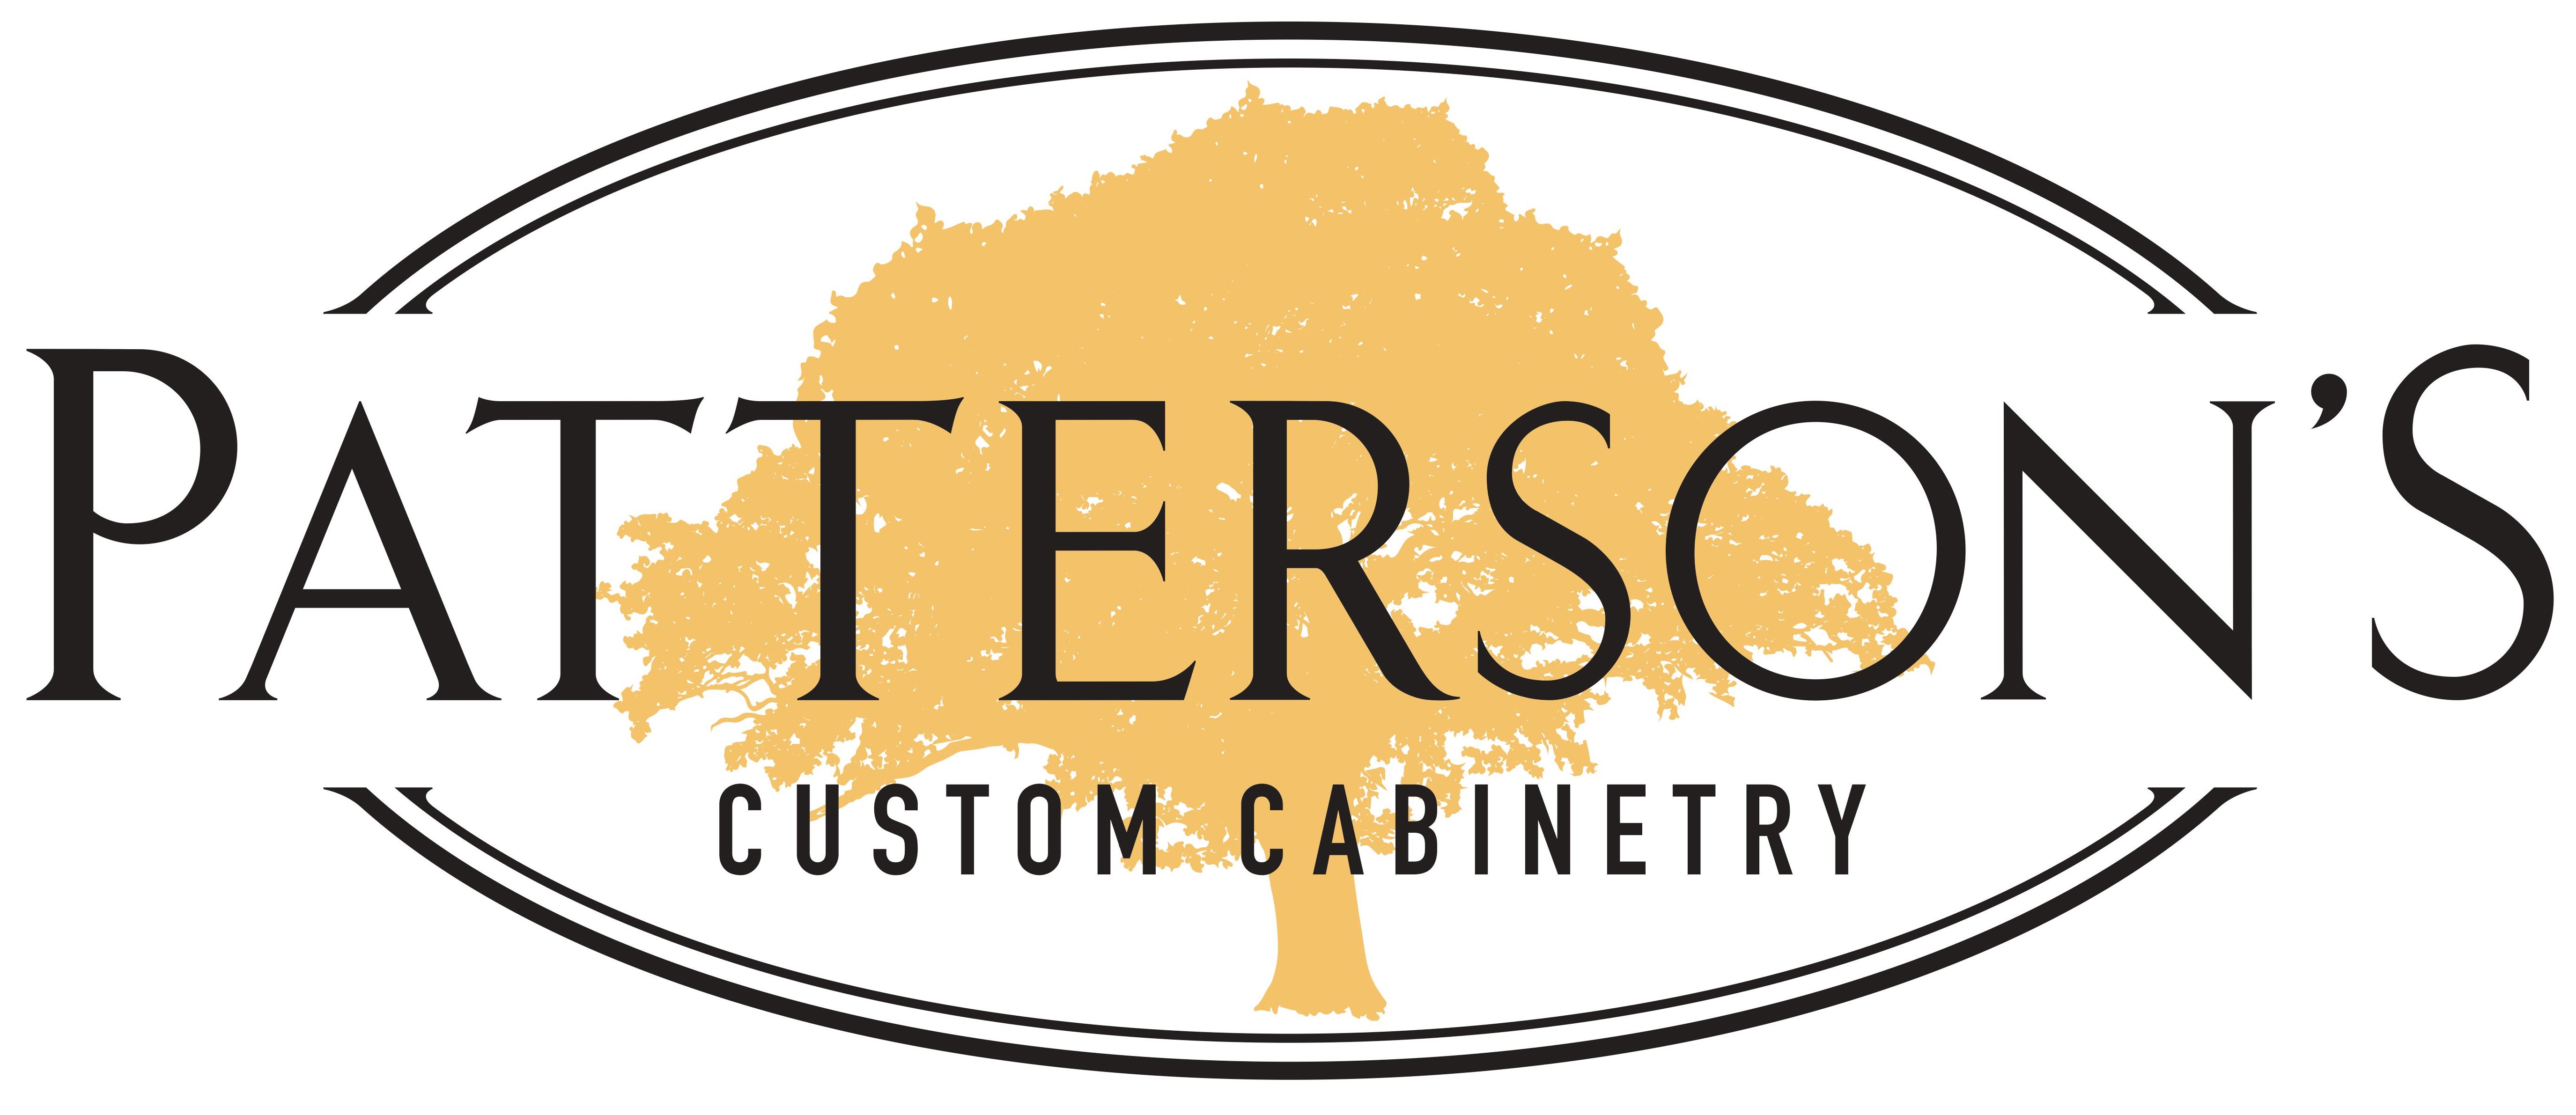 Patterson's Custom Cabinetry logo